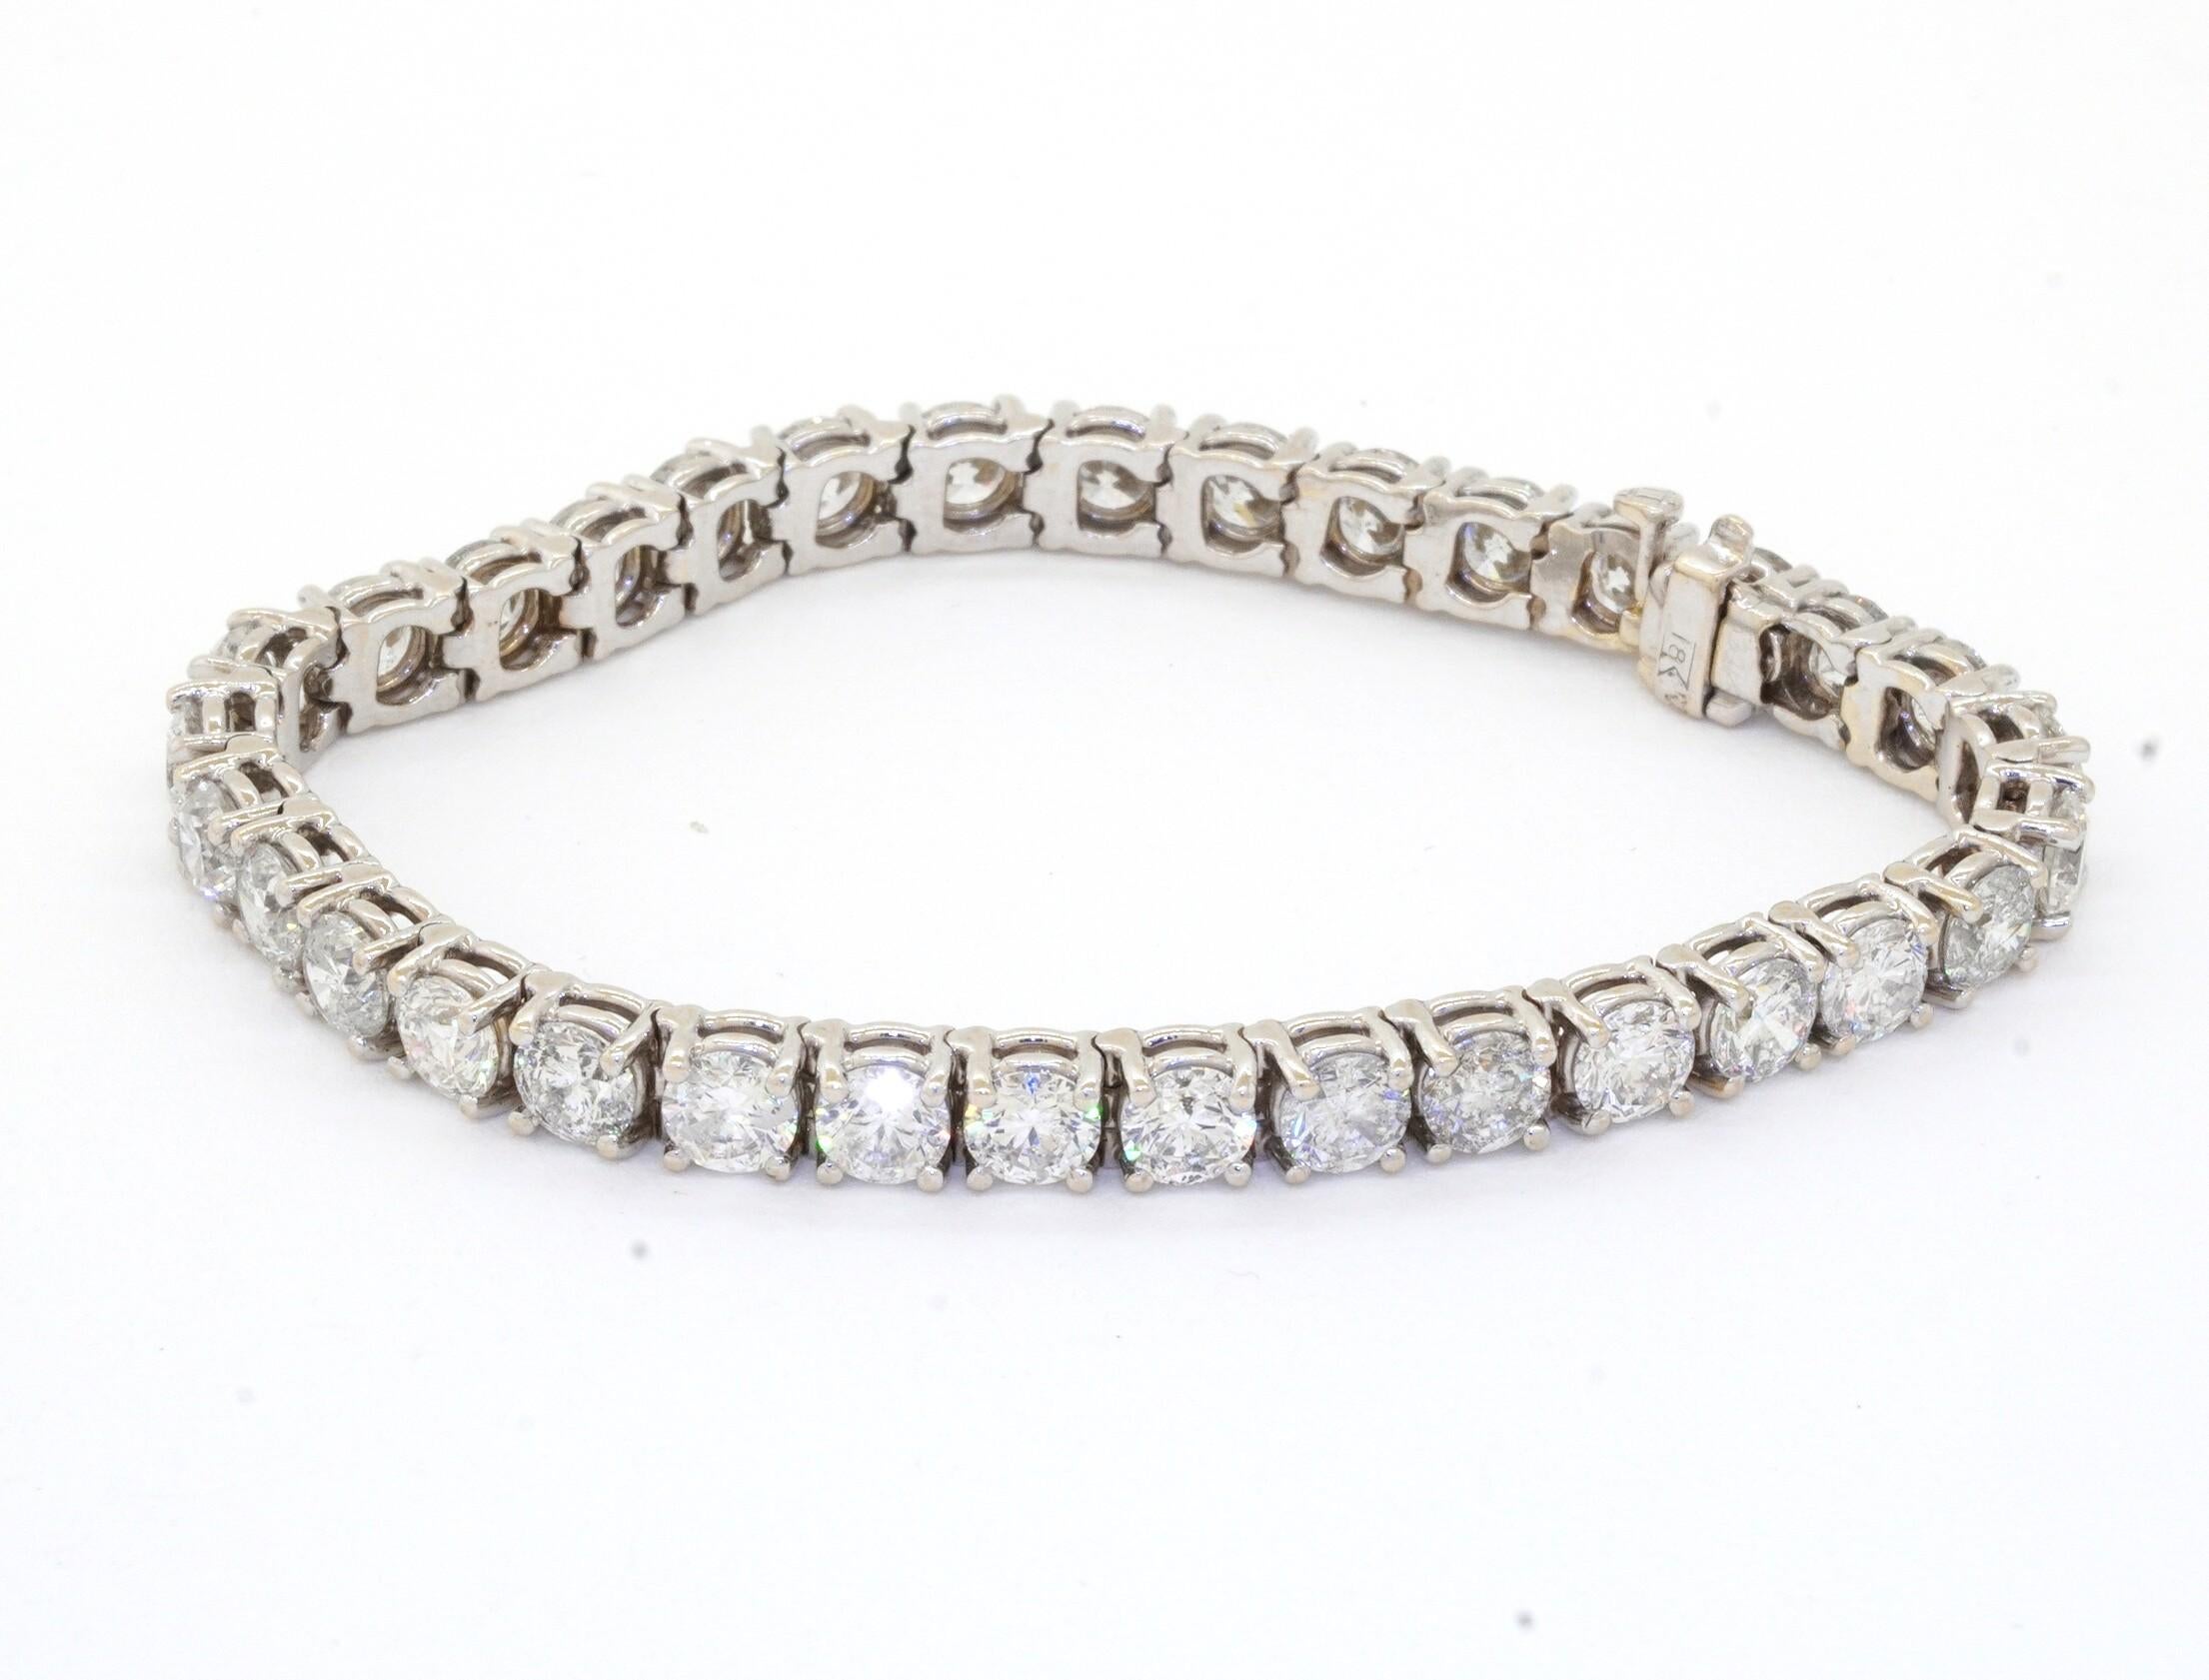 Heavy 18K white gold 16.50CT diamond tennis line bracelet w/ 0.50CT diamonds! This fashionable piece of jewelry is crafted in beautiful 18K white gold and features 33 diamonds (SI2 - I1 clarity/G - H color) with a combined weight of approx. 16.50CT.